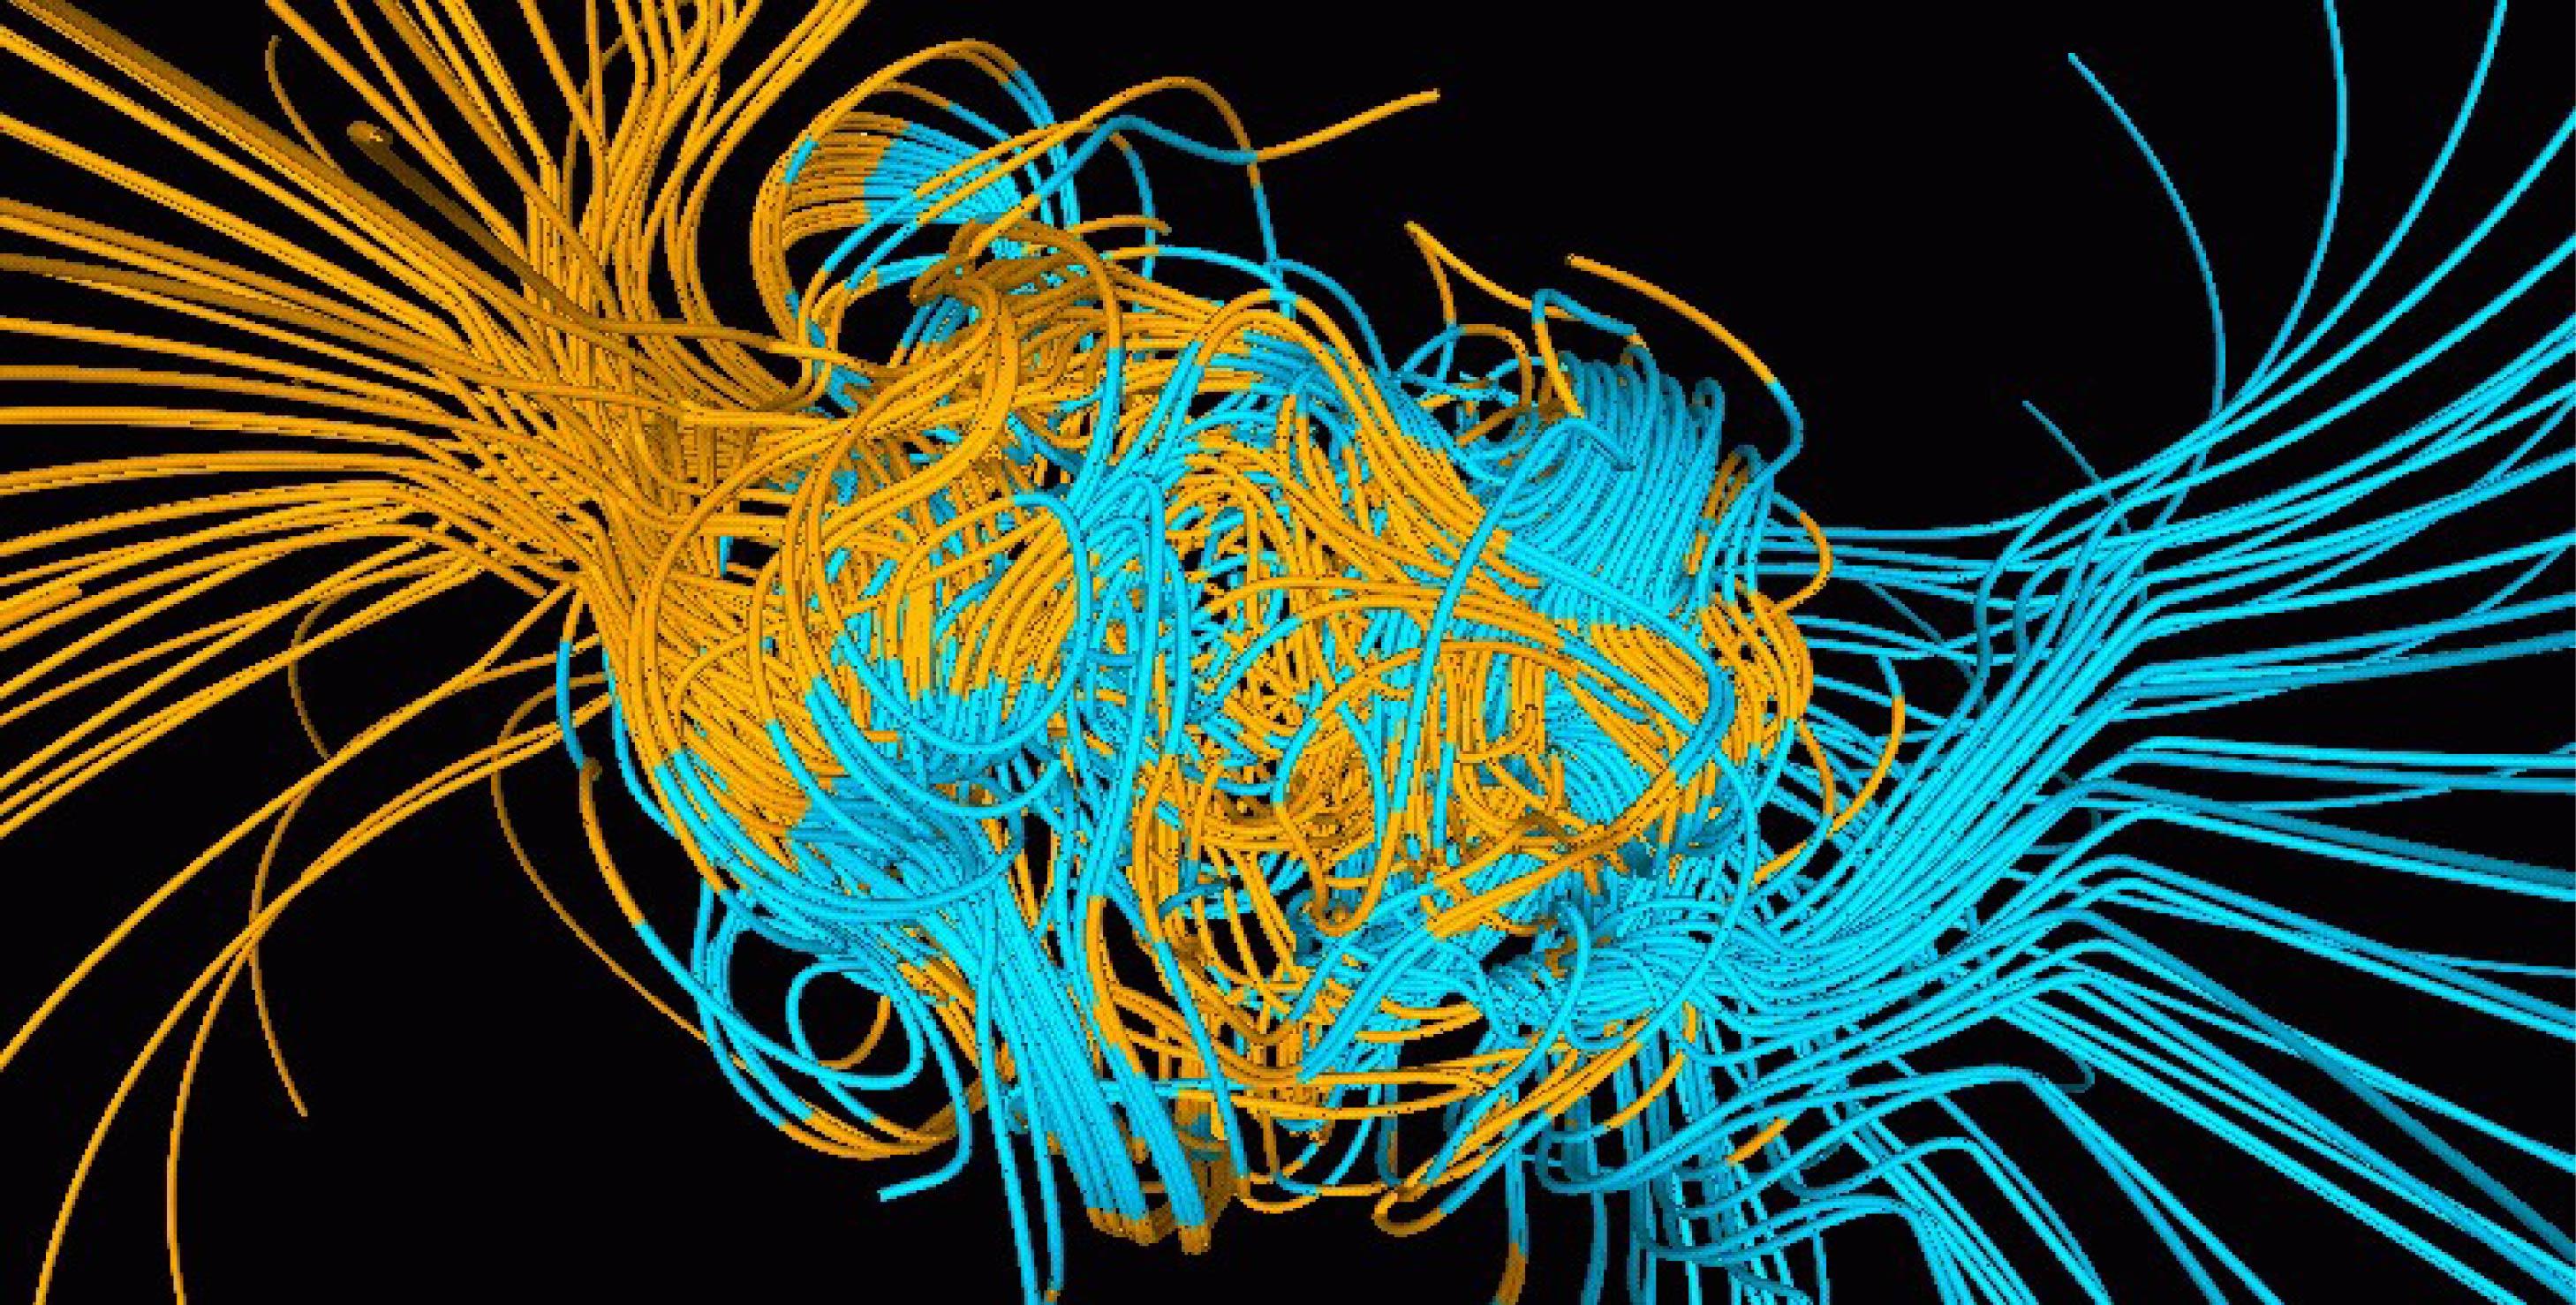 Model illustration showing threads of blue and yellow coming out of Earth